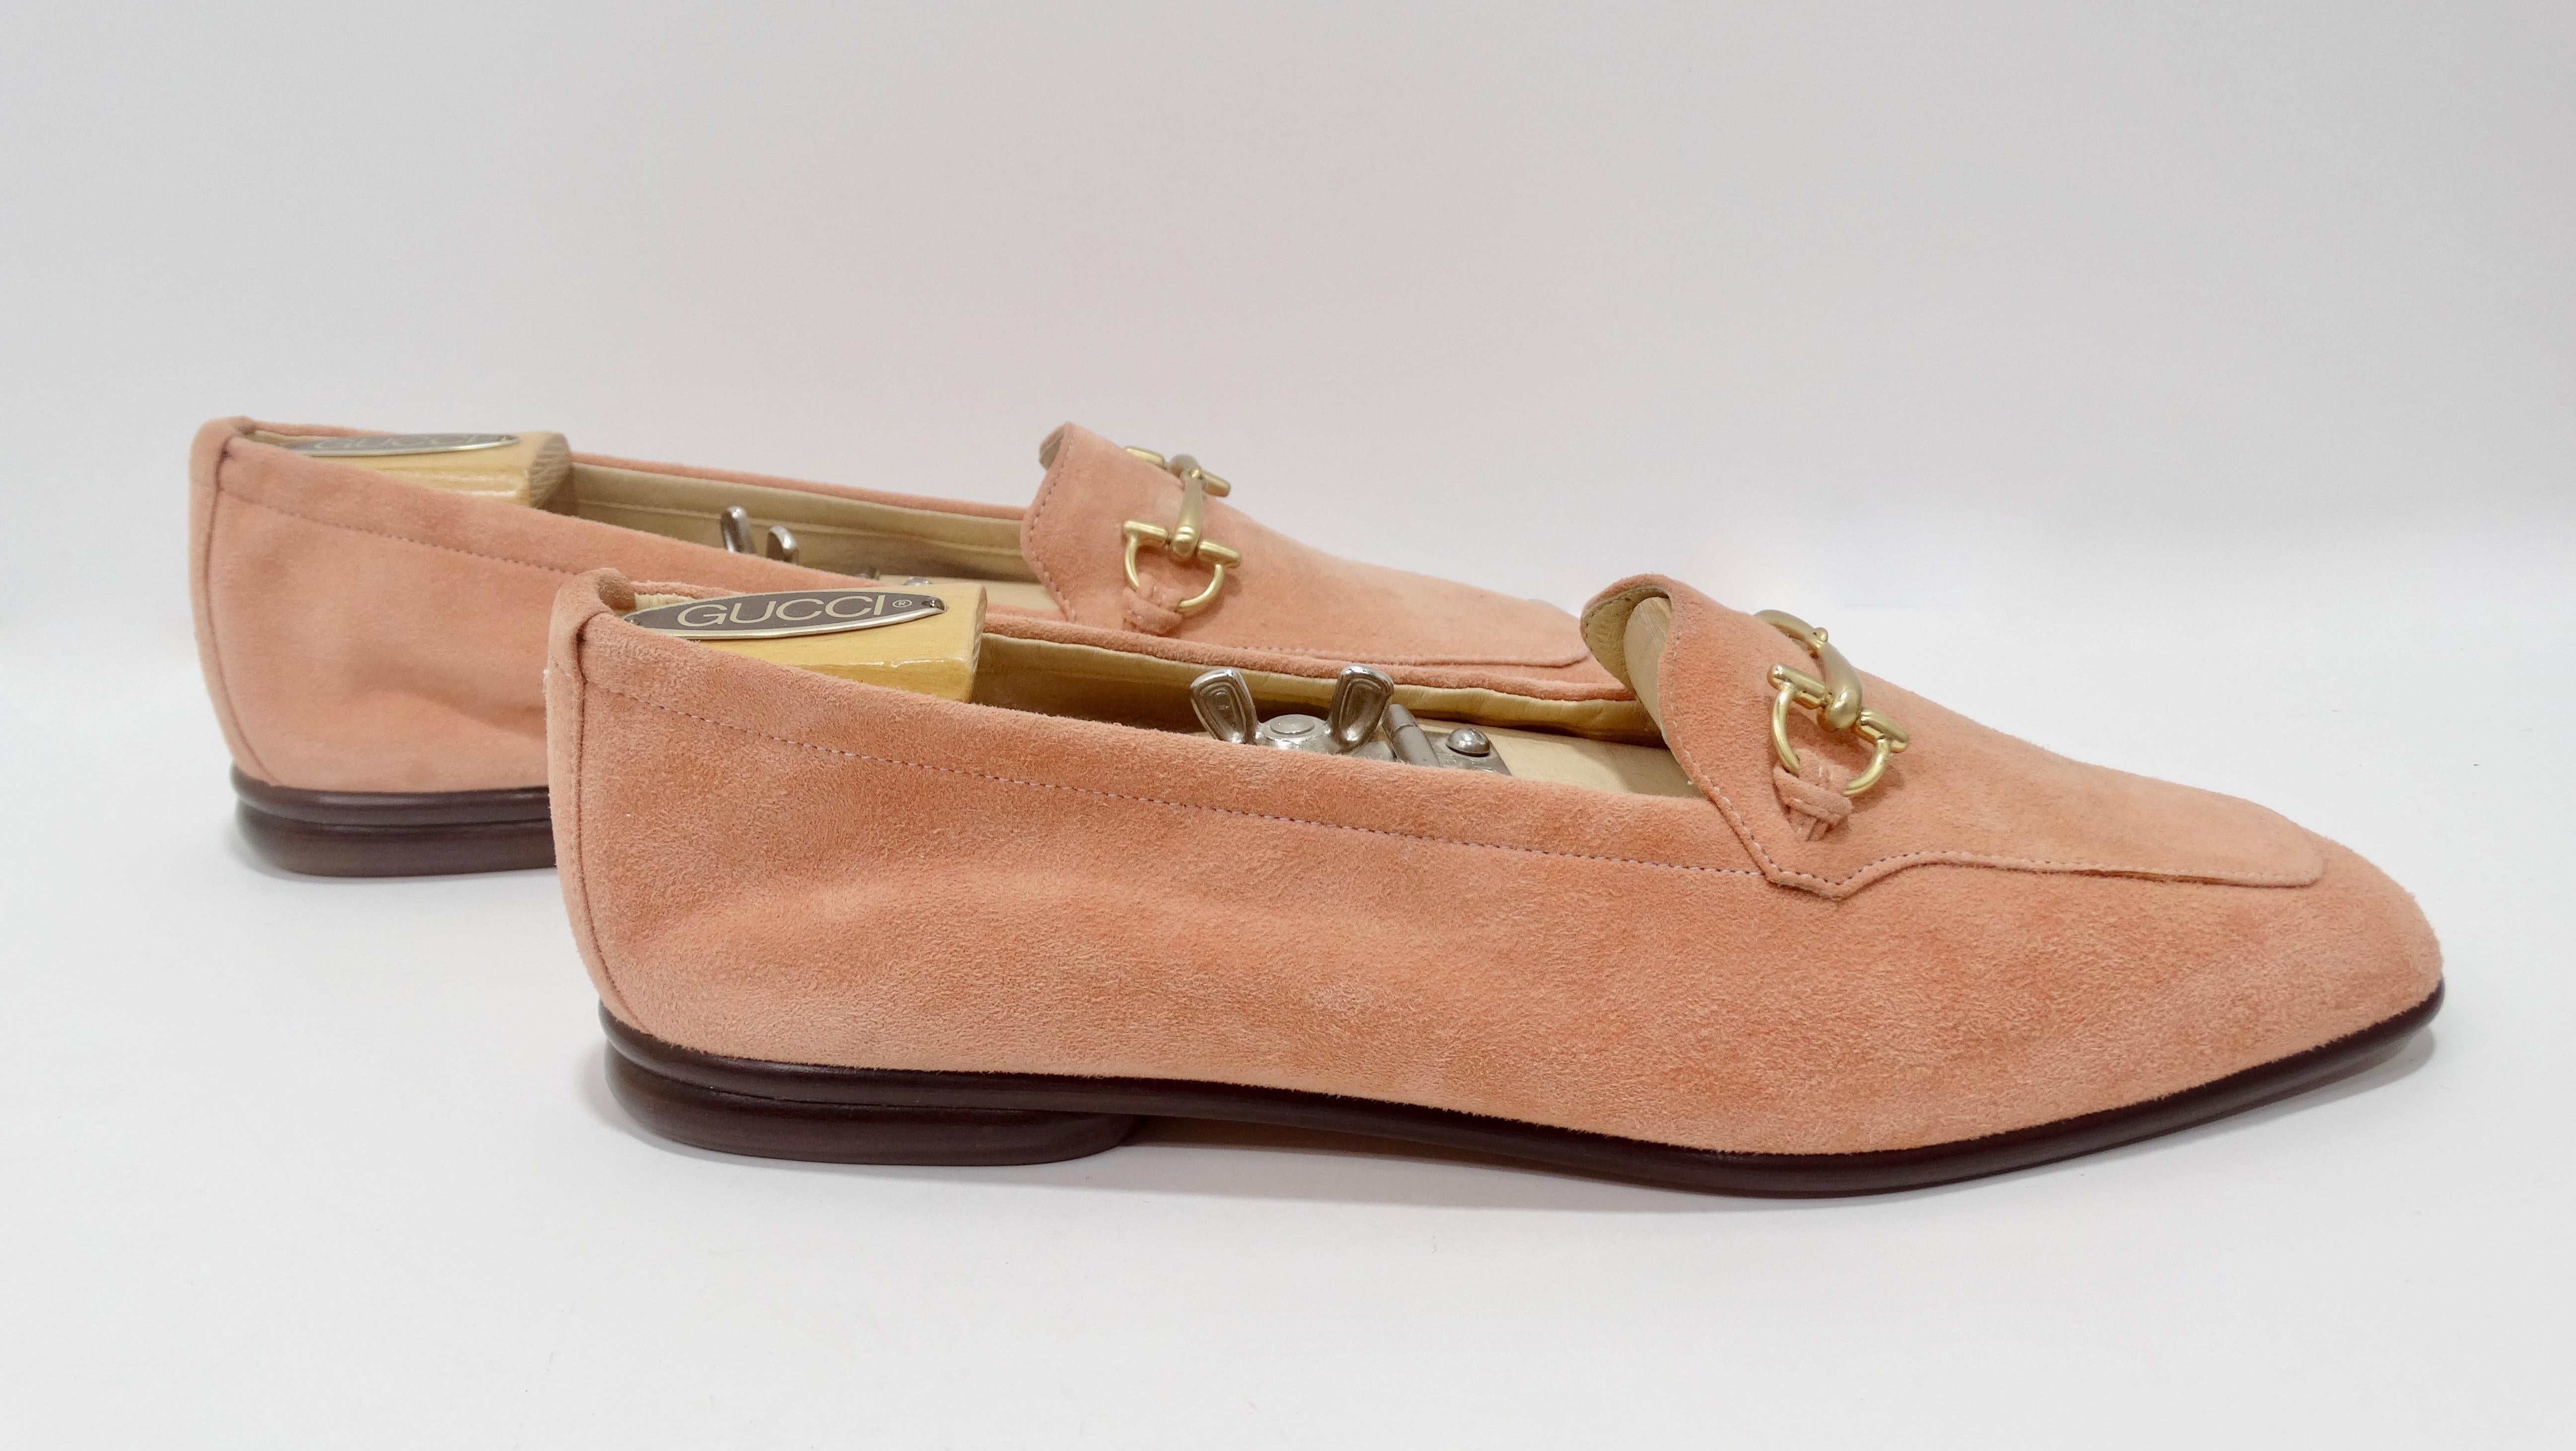 Snag yourself these adorable classic Gucci loafers! Circa 1980s, these loafers are crafted from pink suede and feature the signature Gucci horse-bit in gold toned hardware across the upper and dark wood soles. Stamped Gucci Made in Italy and are